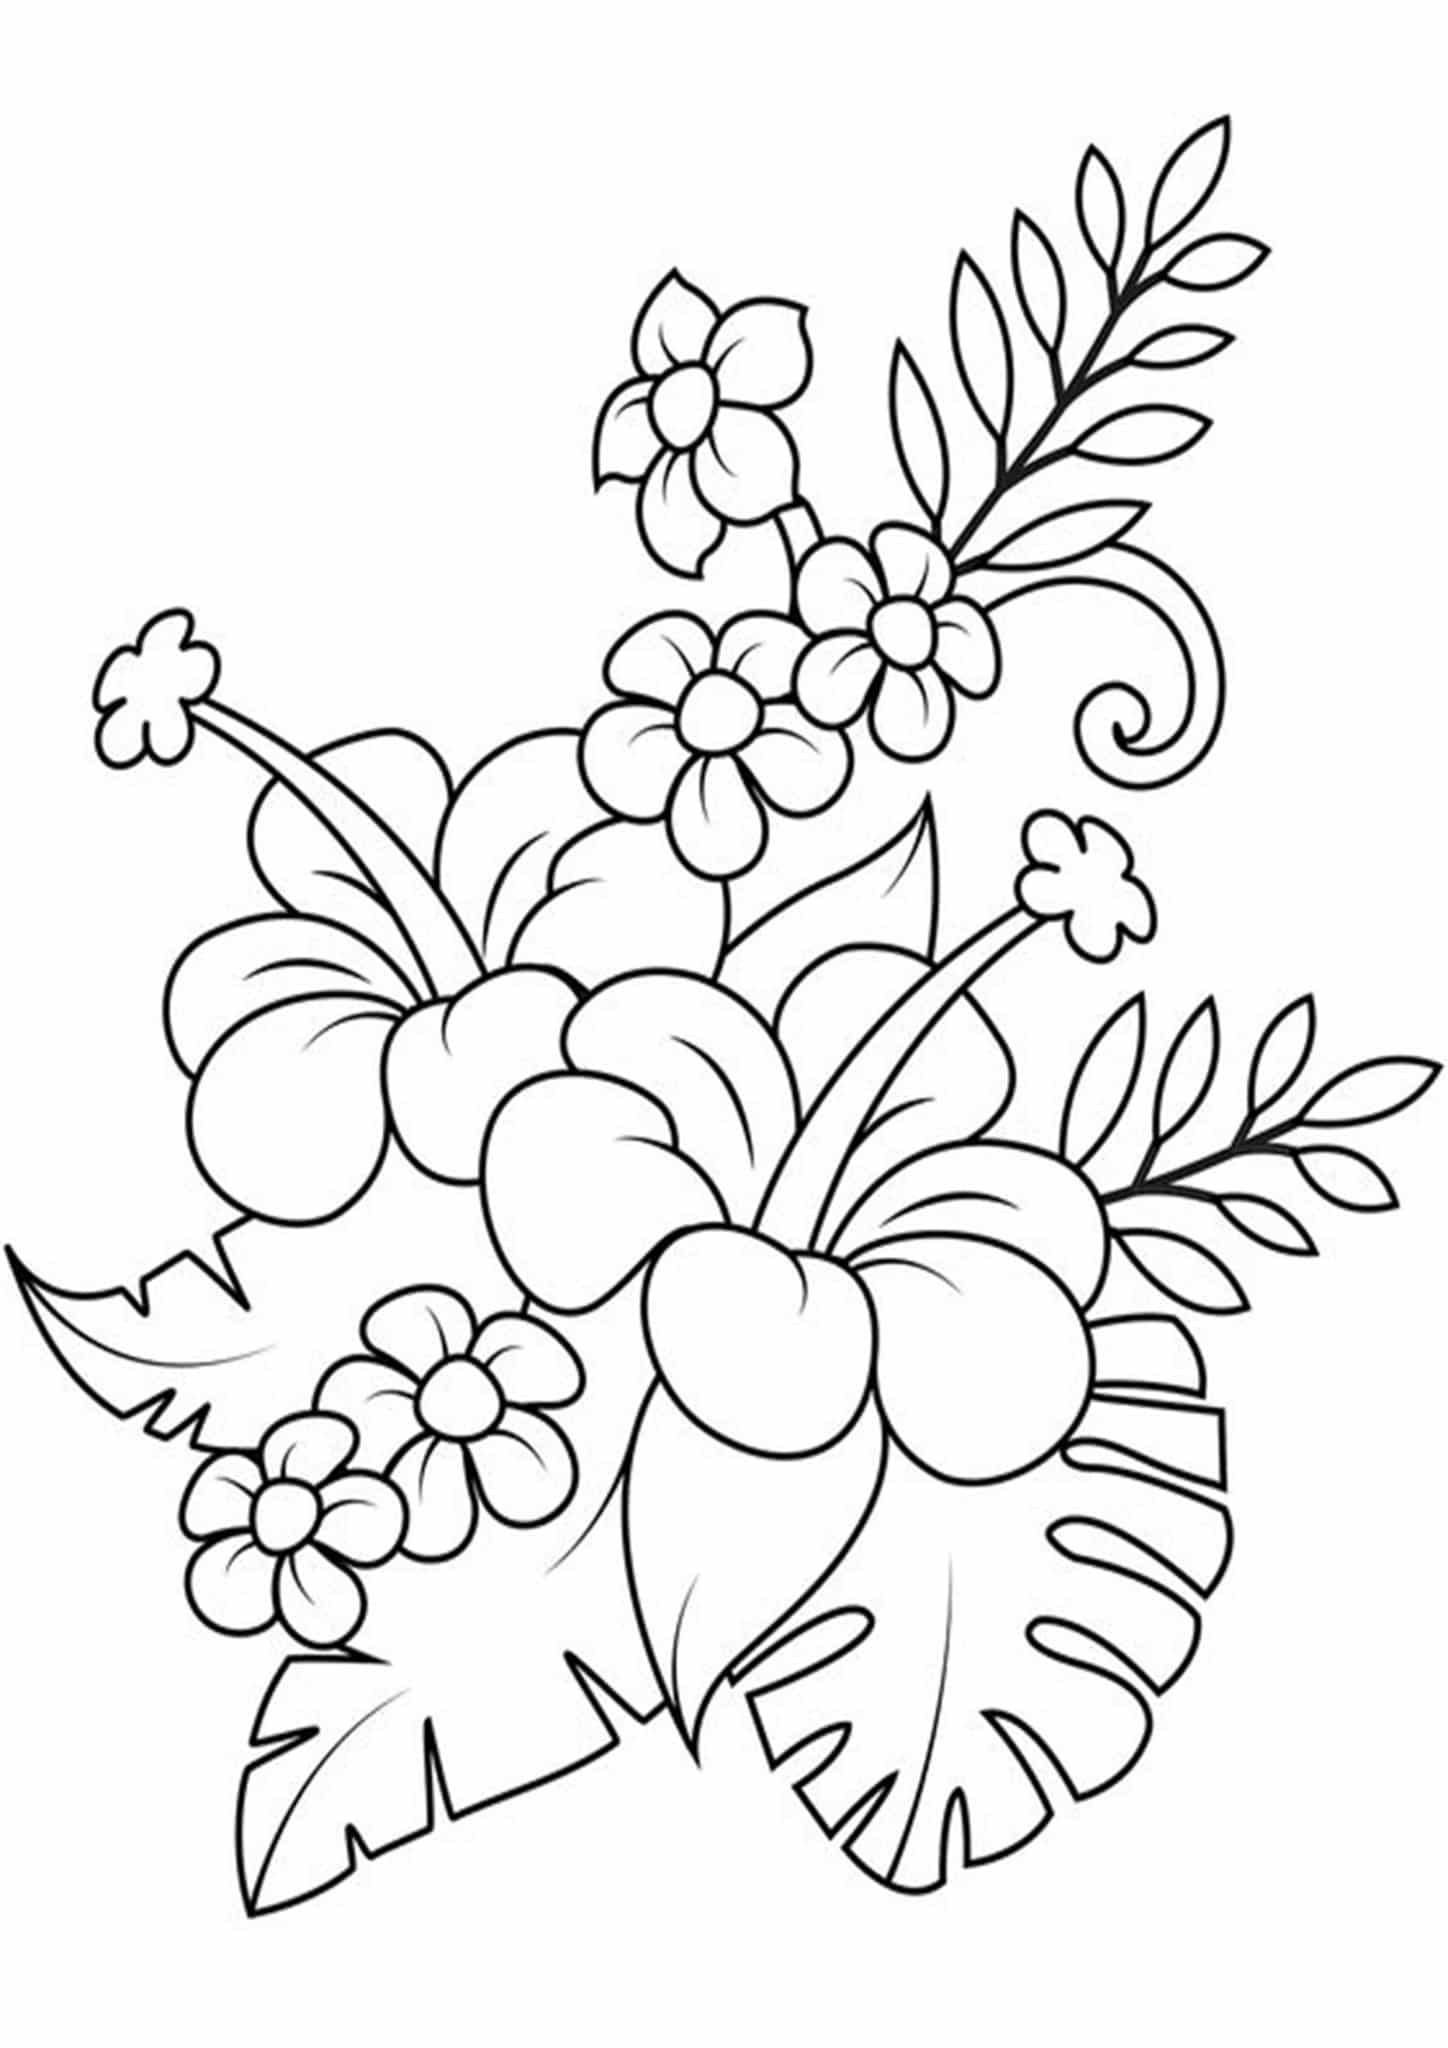 free-easy-to-print-flower-coloring-page-flower-pattern-design-prints